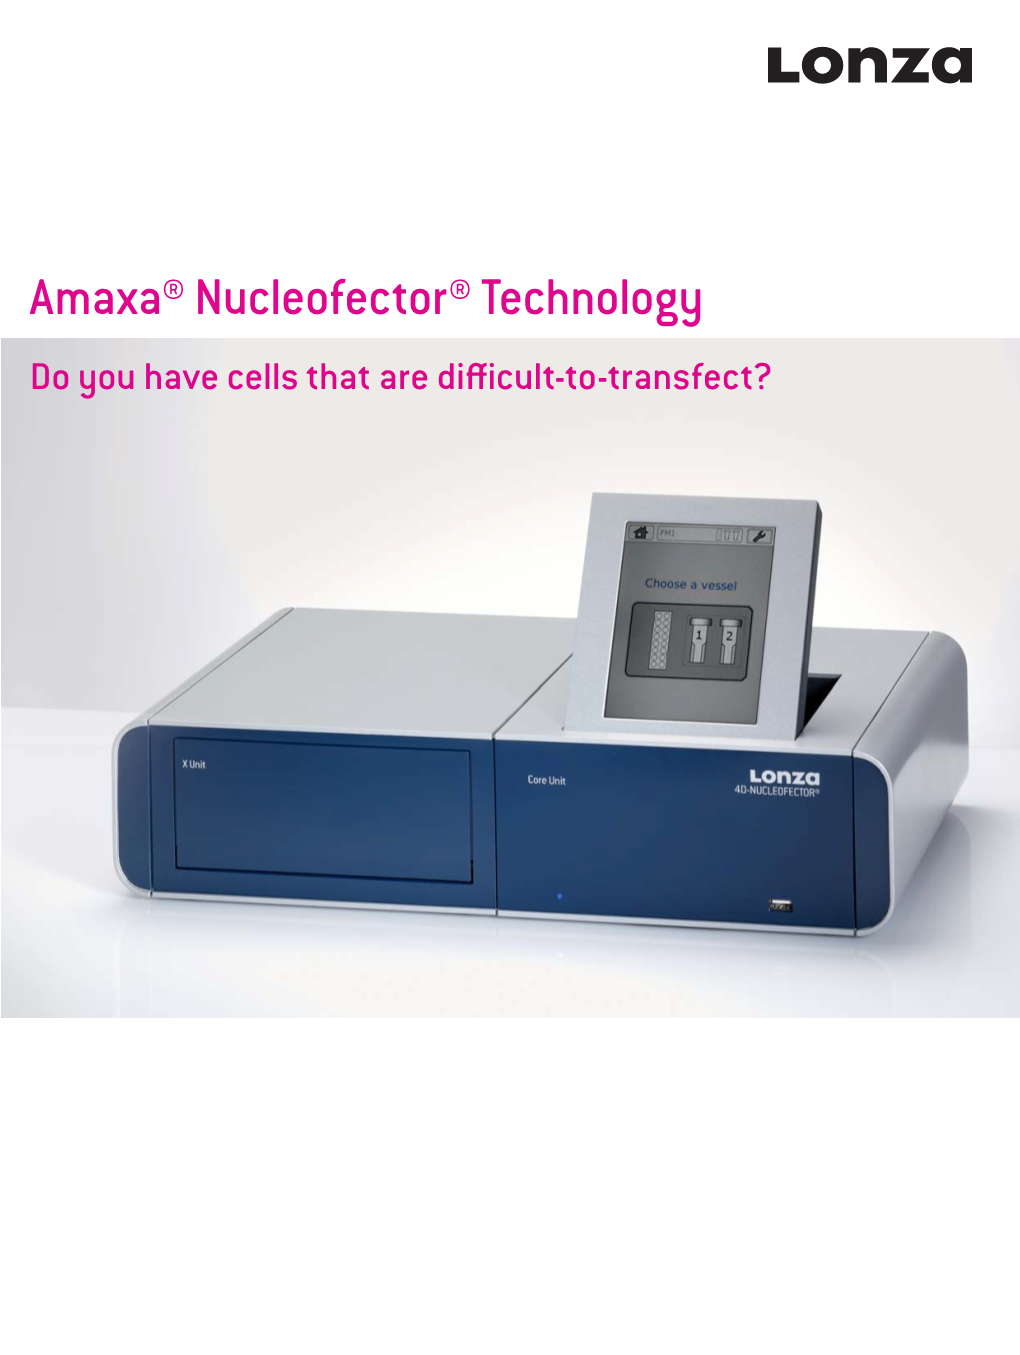 Amaxa® Nucleofector® Technology Do You Have Cells That Are Diffi Cult-To-Transfect? Amaxa® Nucleofector® Technology